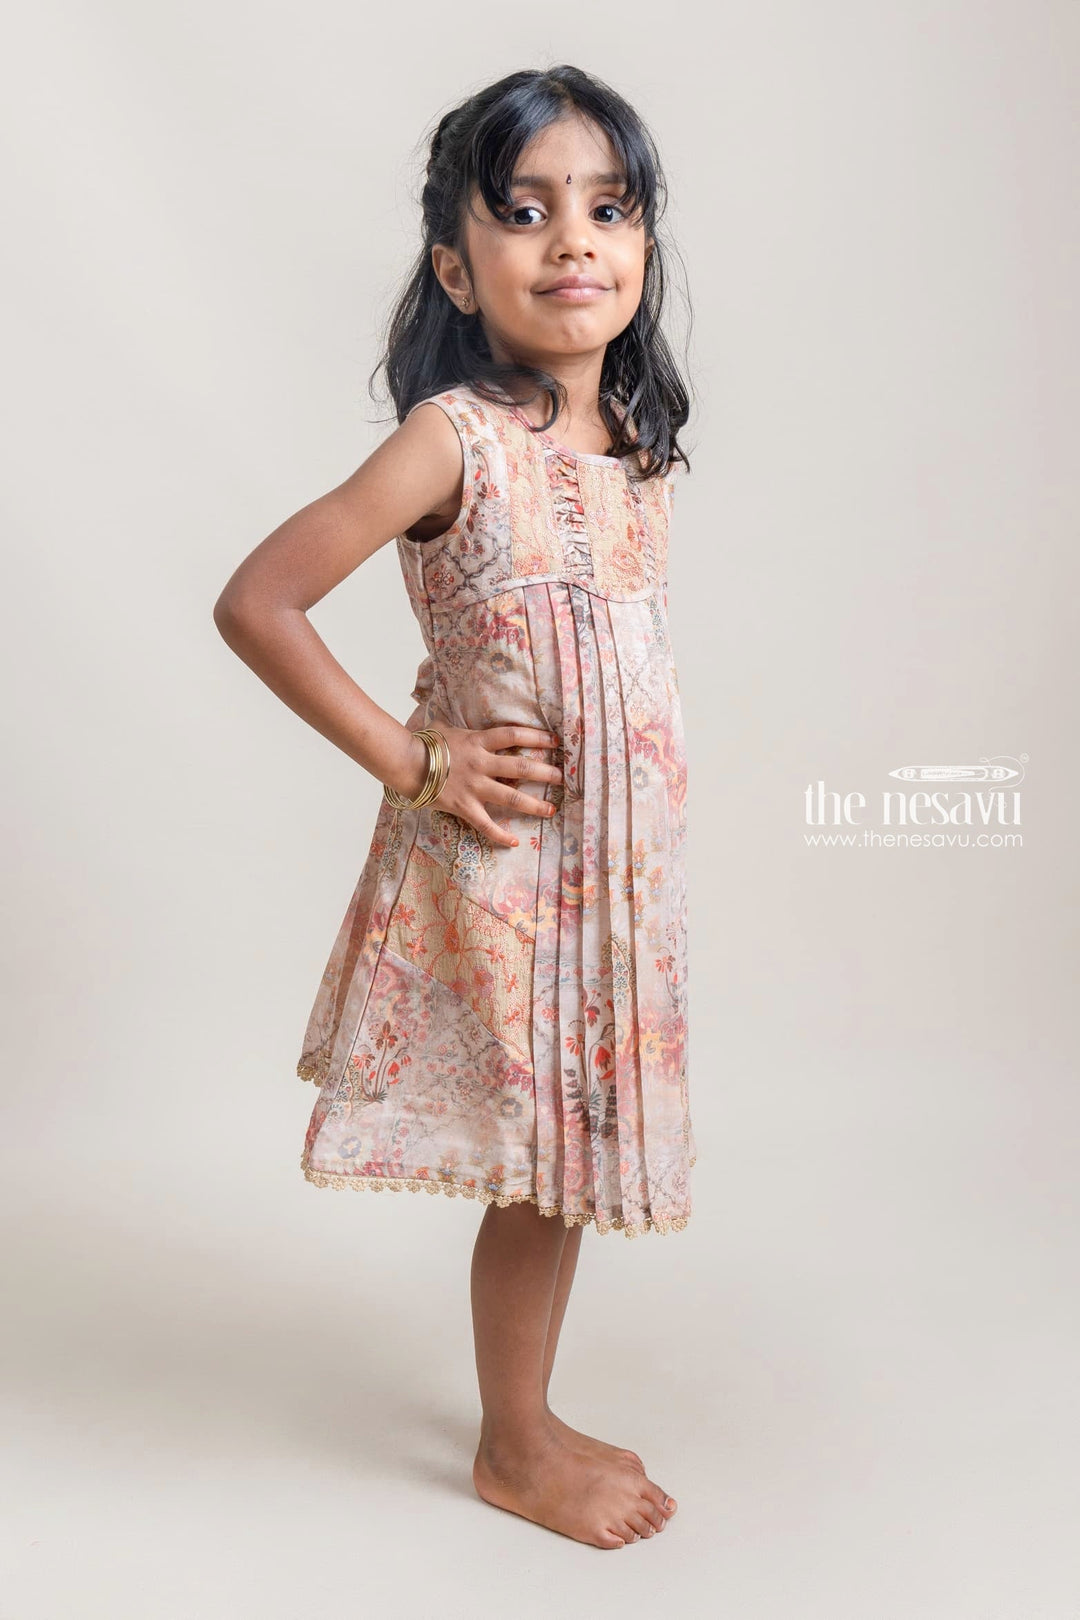 The Nesavu Girls Cotton Frock Adorable Beige Paisley Printed Pleated Cotton Frock For Girls Nesavu Fantastic Floral Printed Cotton Frock For Girls | Premium Cotton Frocks | The Nesavu